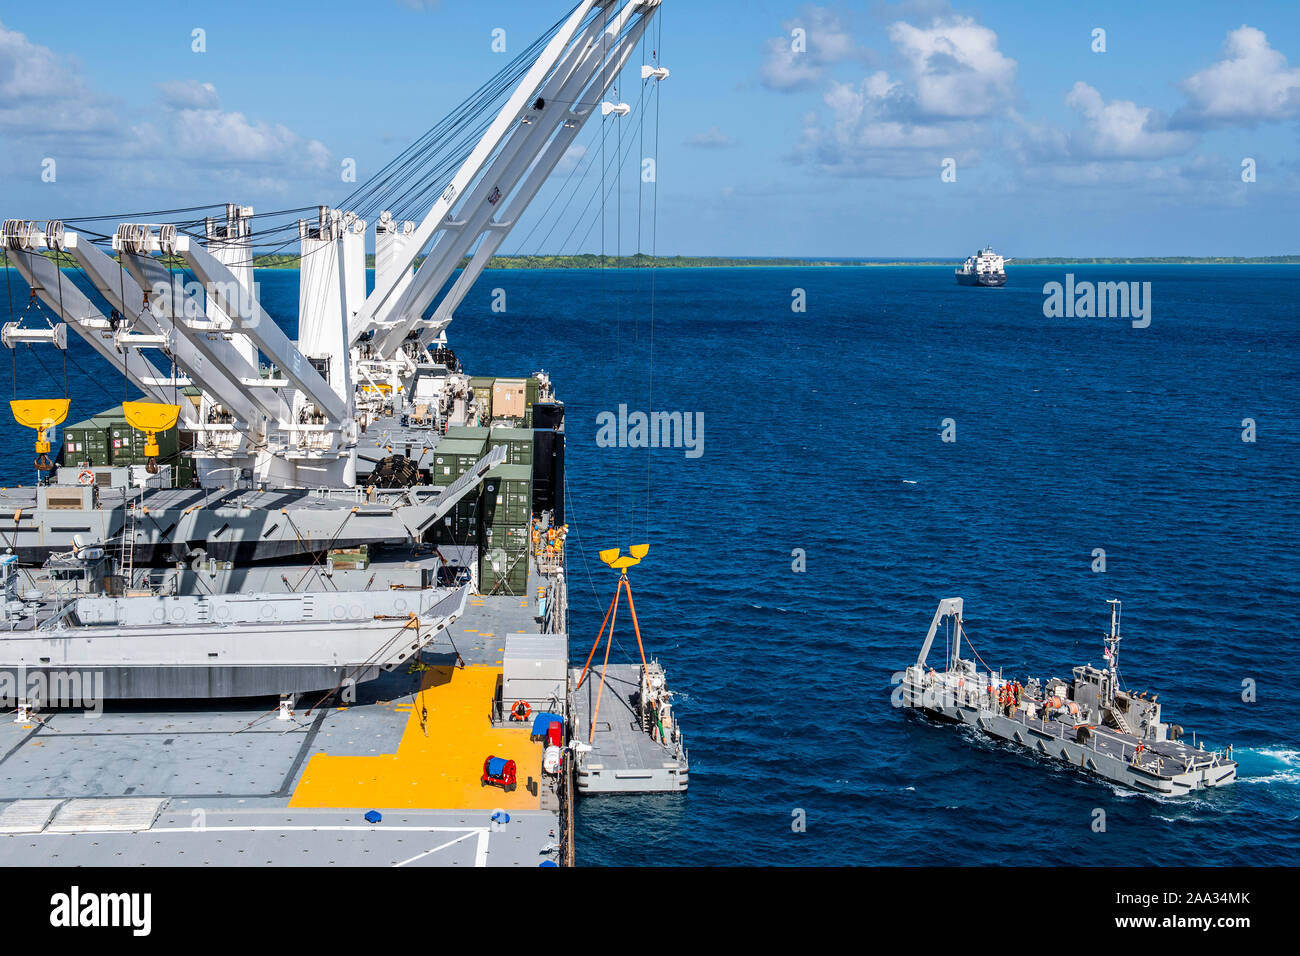 191112-N-CO914-1179  DIEGO GARCIA, British Indian Ocean Territory (November 12, 2019) Sailors aboard a warping tug approach an Improved Navy Lighterage System (INLS) Power Module being offloaded by a crane aboard Military Sealift Command Bob Hope-class roll-on roll-off vehicle cargo ship USNS Seay (T-AKR 302) during an INLS training mission. Navy Cargo Handling Battalion (NCHB) 1, NCHB 8, NCHB 11, NCHB 13, Assault Craft Unit (ACU) 1 and Amphibious Construction Battalion (ACB) 1 are participating in the INLS training mission under the direction of Commander, Task Force (CTF) 75 in preparation f Stock Photo